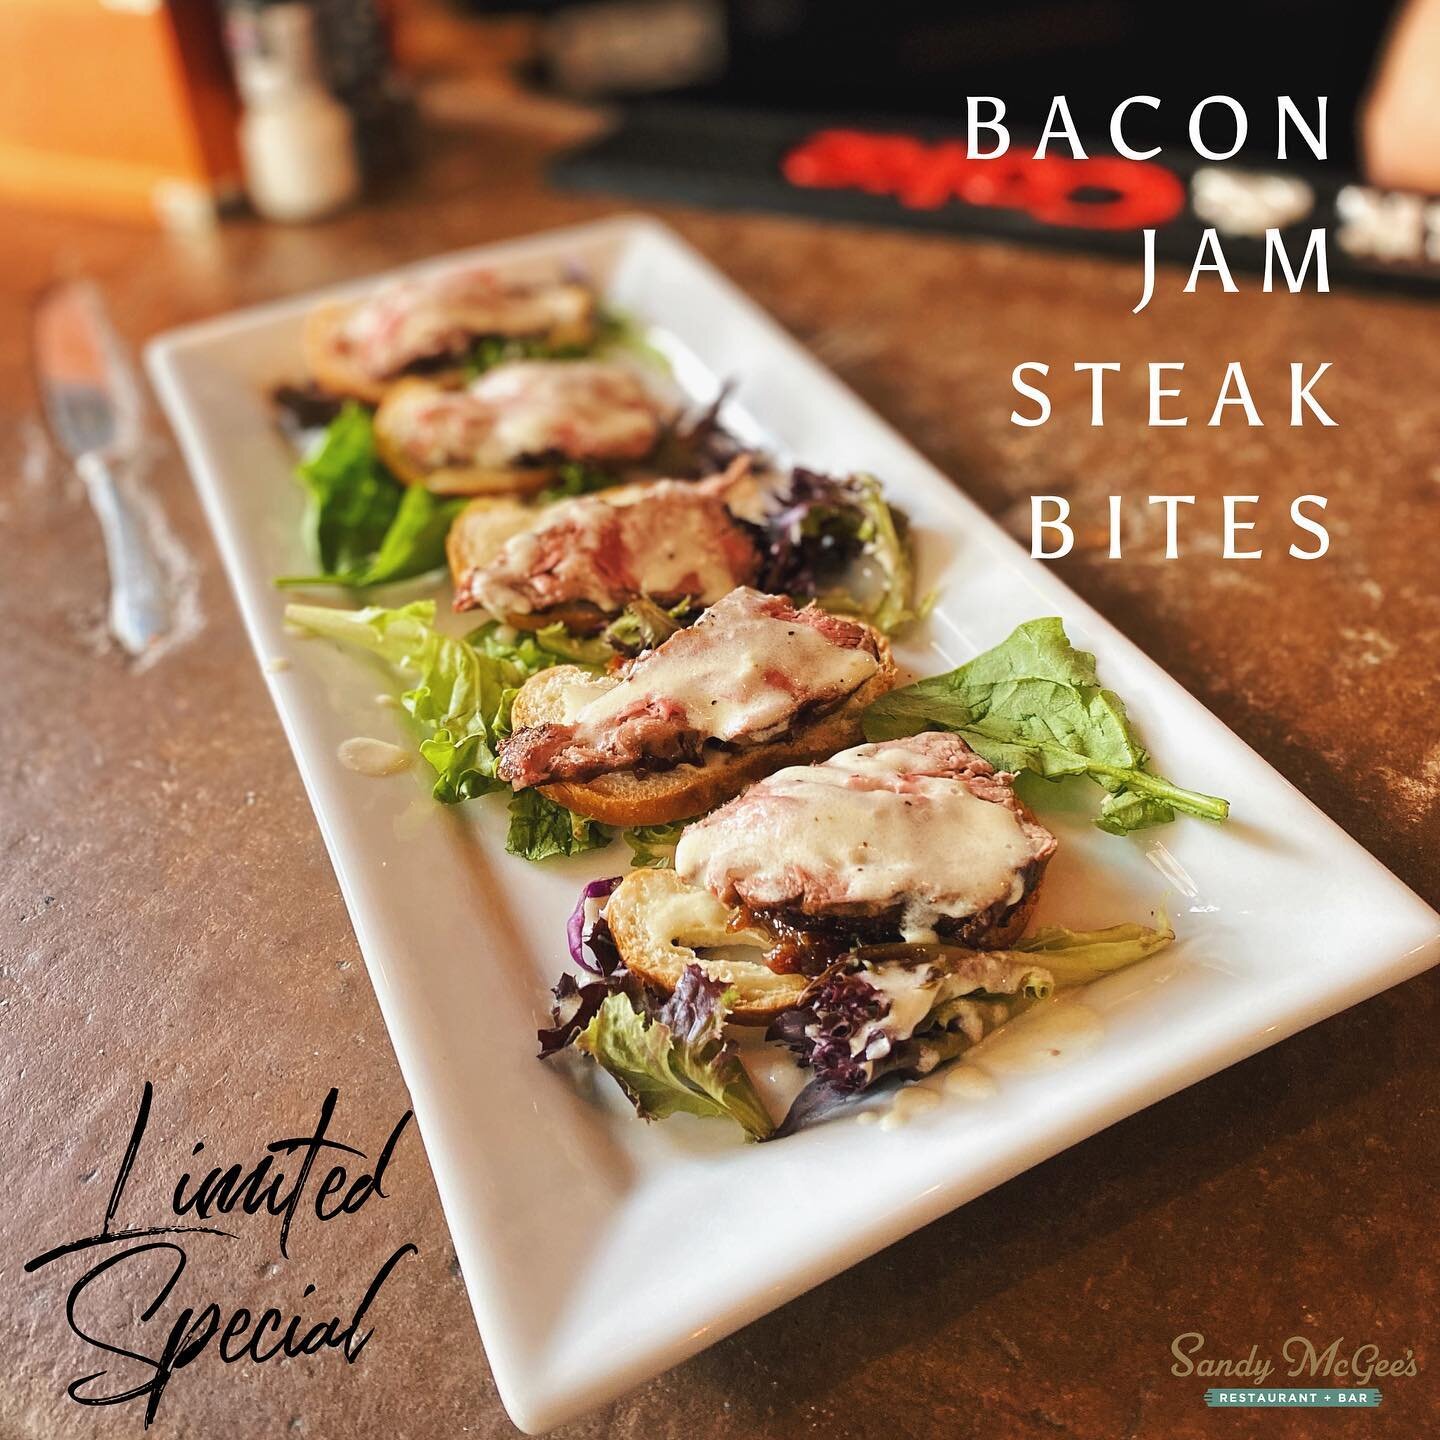 🚨Special for this weekend ONLY🚨

BACON JAM STEAK BITES
Medium-rare tenderloin slices on toast with house-made bourbon-bacon jam and Gorgonzola cream 🤤

Get them after 4pm this Thursday-Saturday!